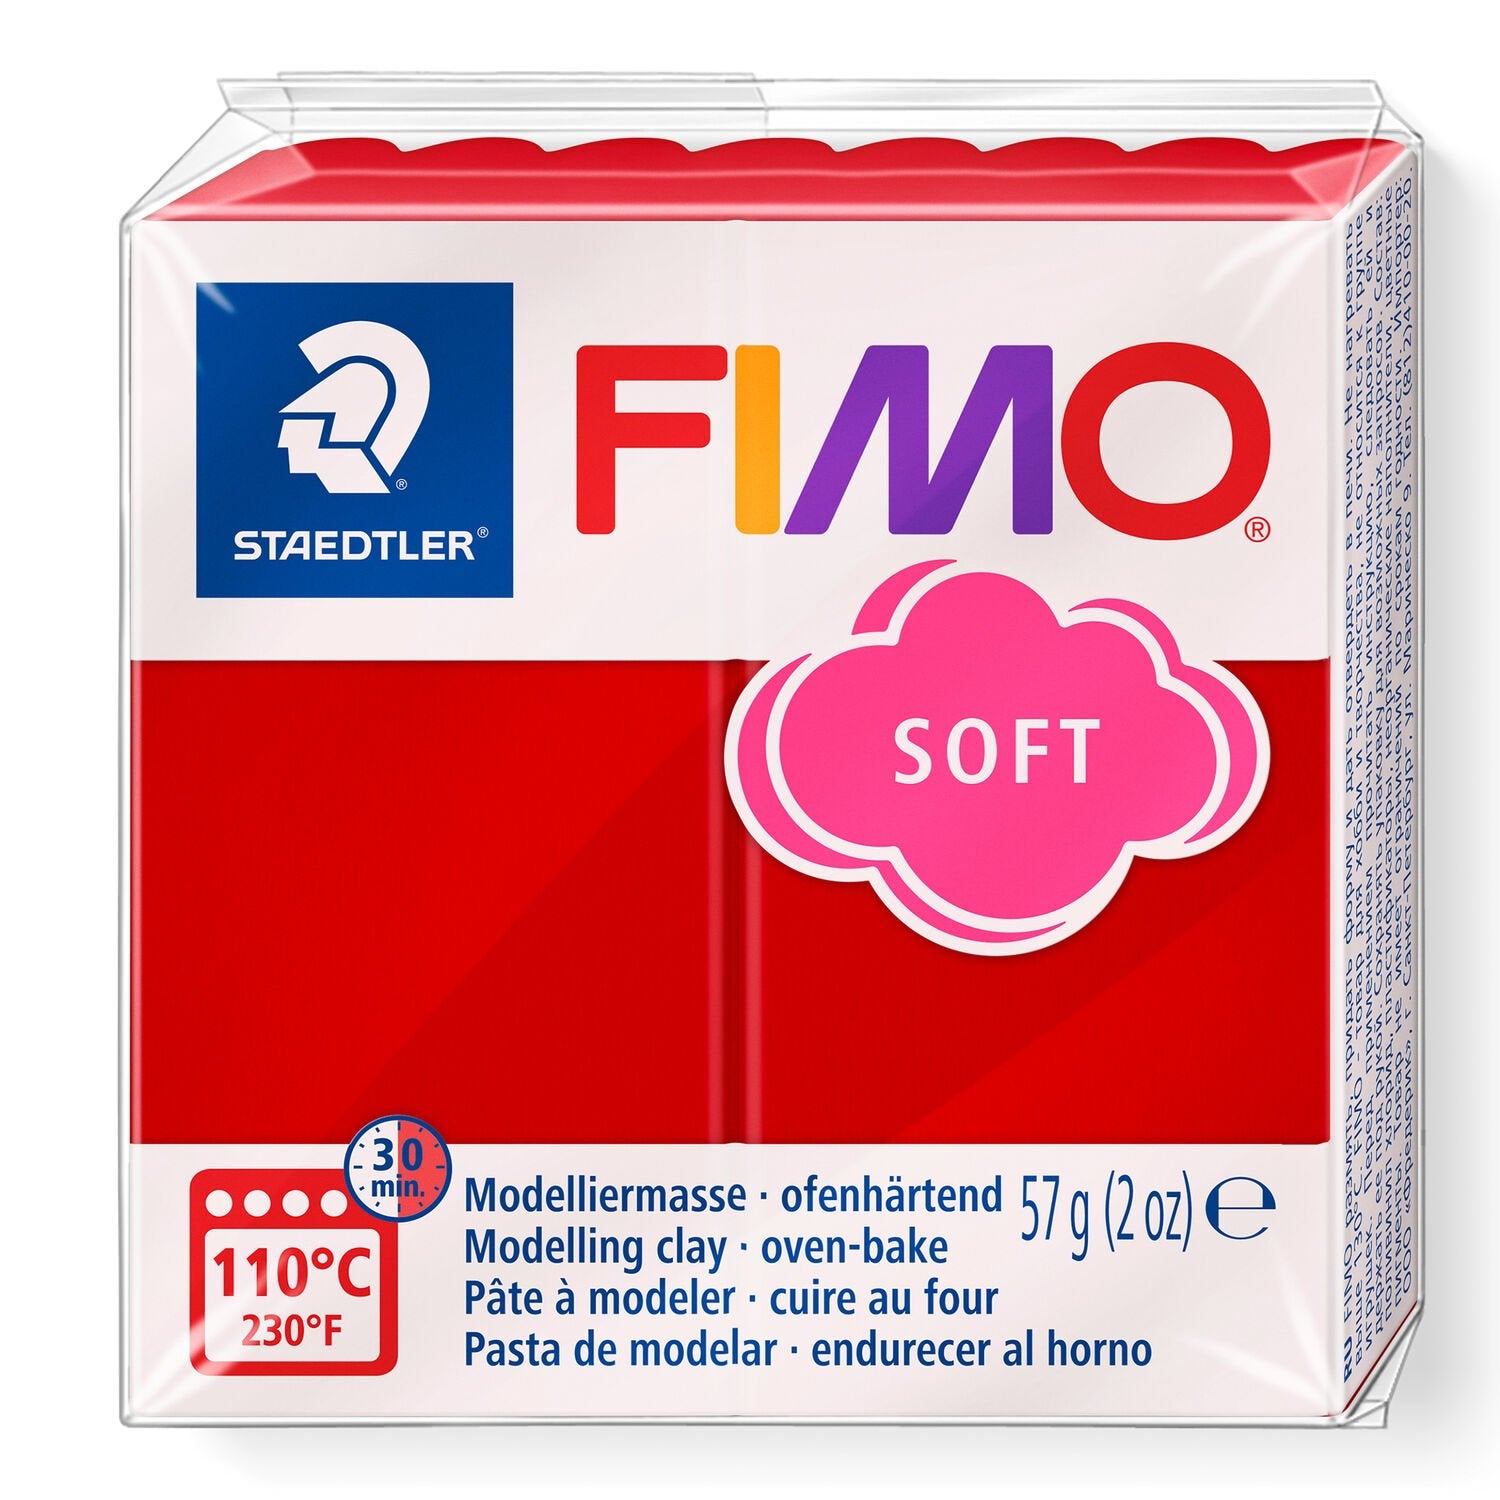 Fimo Soft Polymer Oven Modelling Clay - 57g - Set of 8 - Rainbow Colours